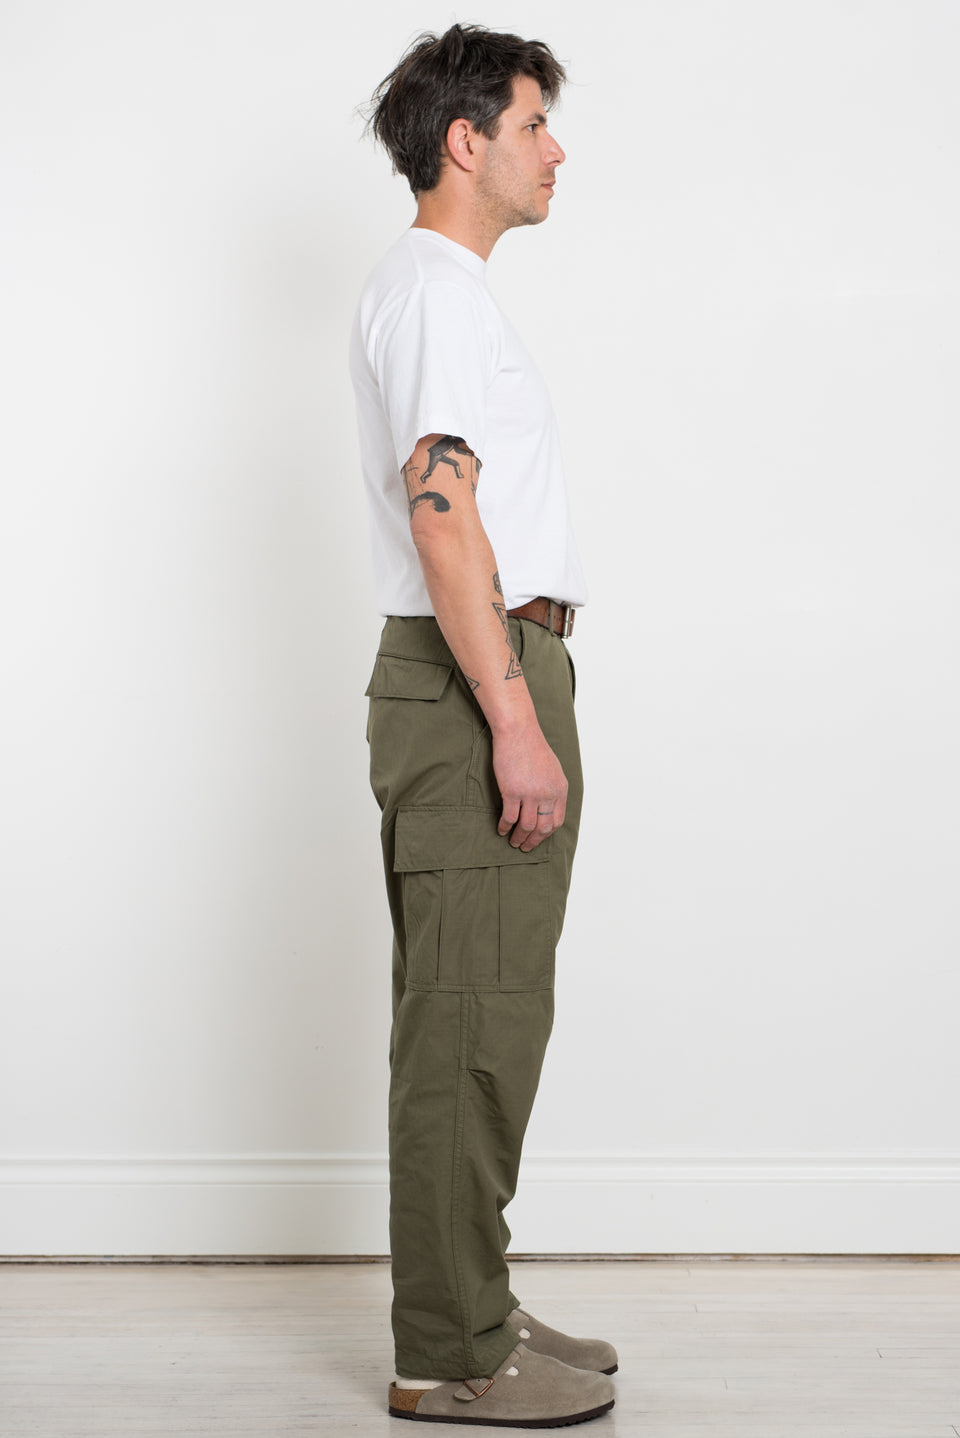 Orslow Vintage Fit 6-Pocket Cargo Pants Army Green 76 - Made in Japan, Pants